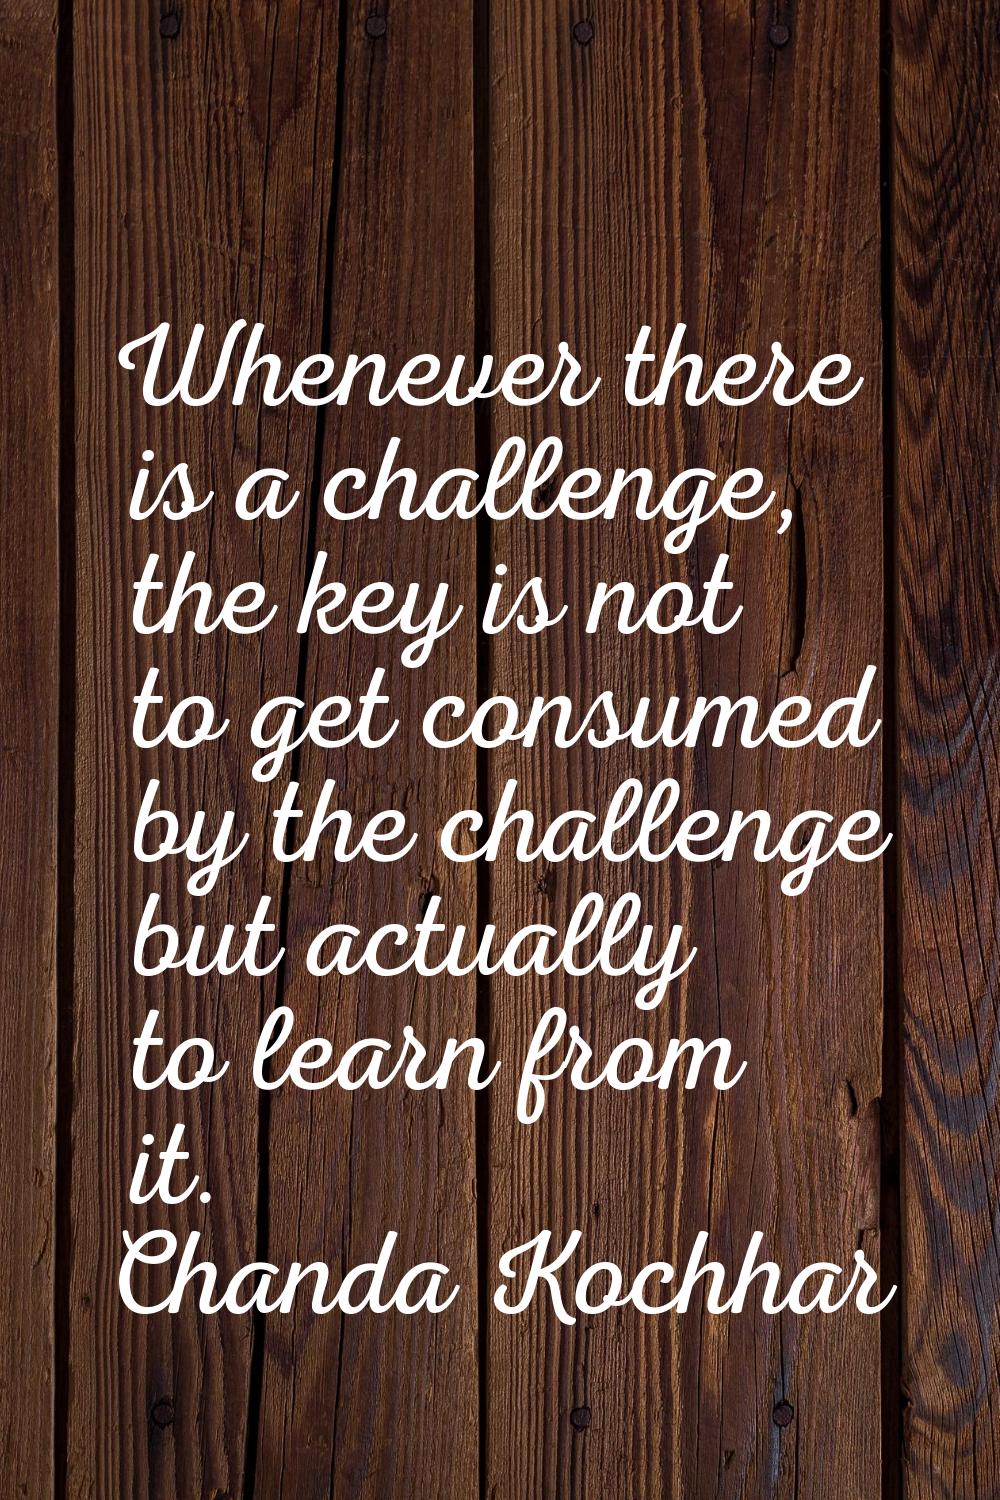 Whenever there is a challenge, the key is not to get consumed by the challenge but actually to lear